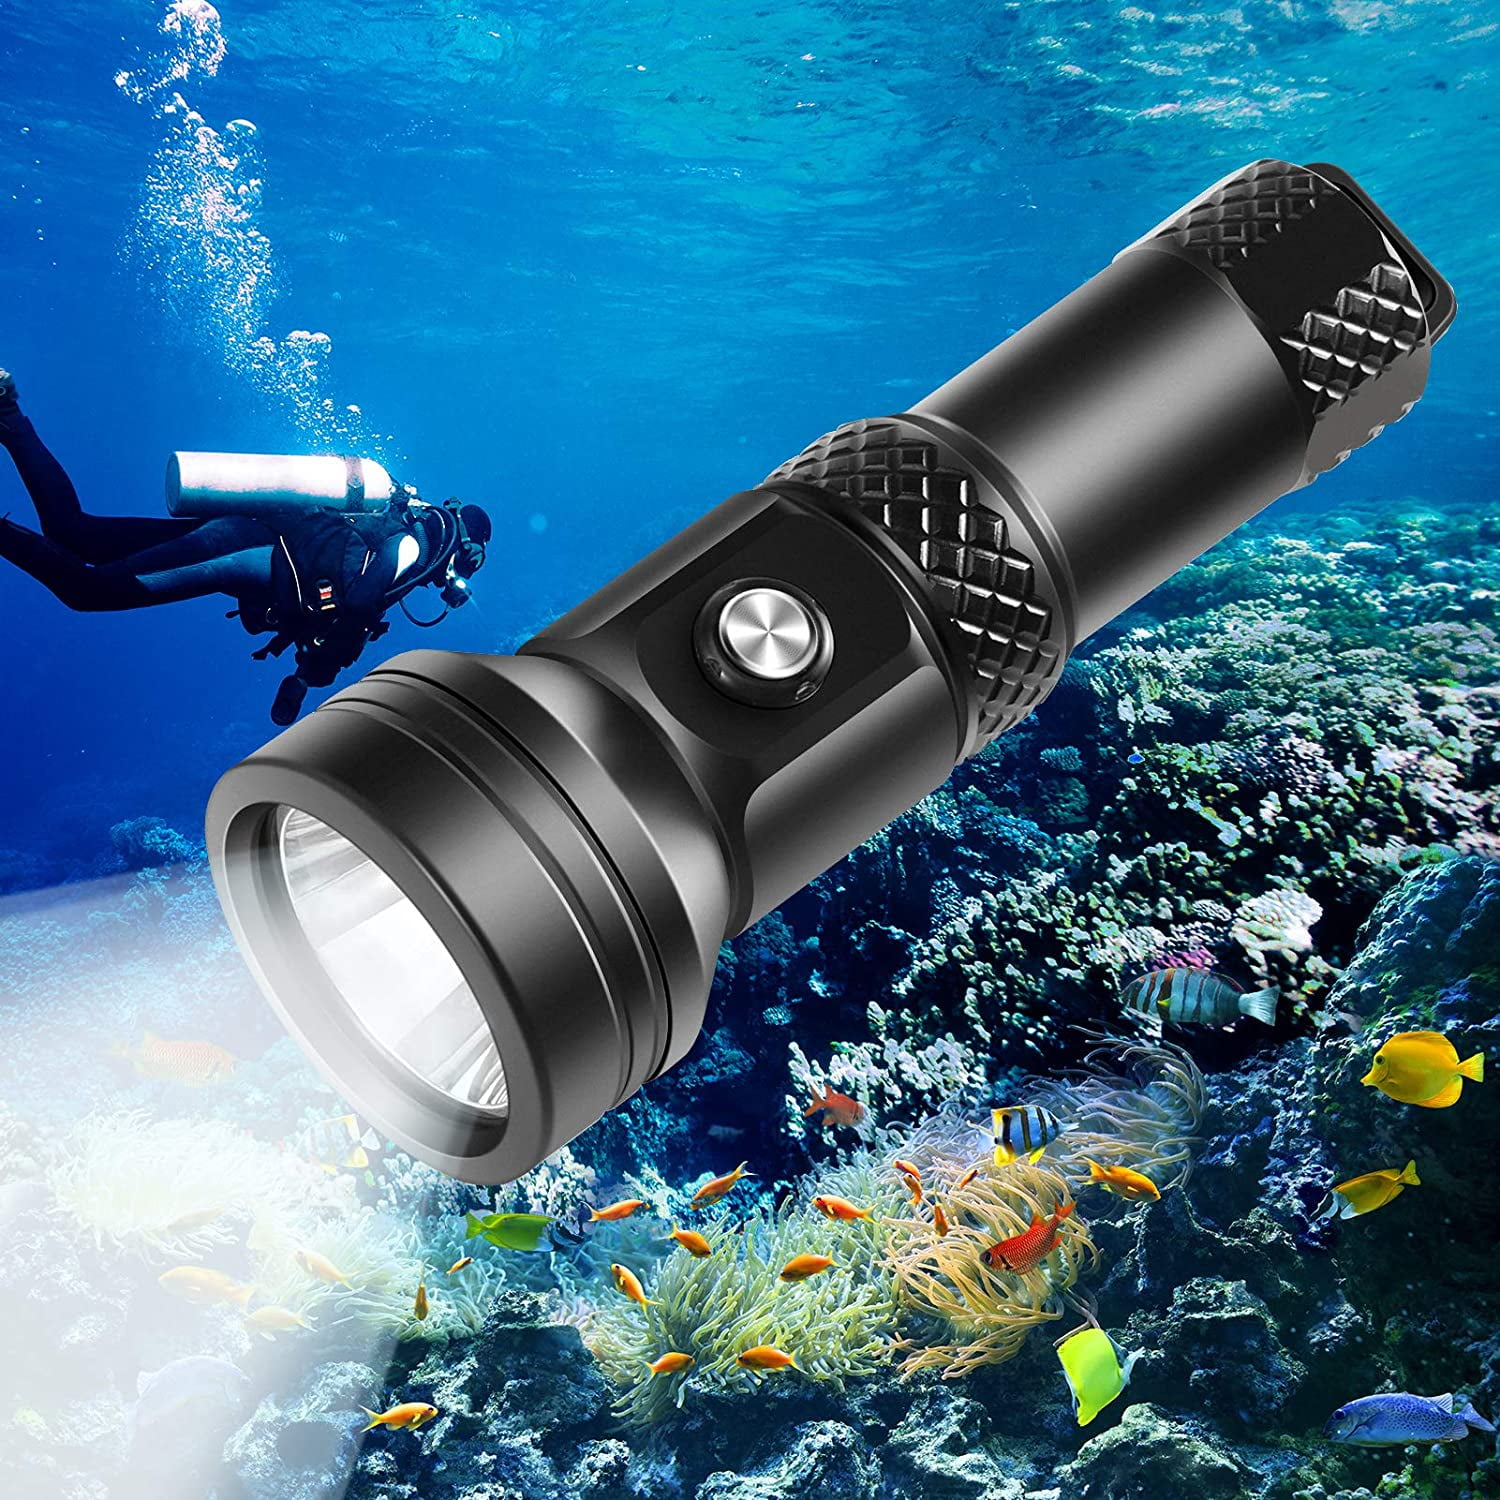 Professional LED Waterproof Scuba Diver Diving Flashlight Underwater Torch